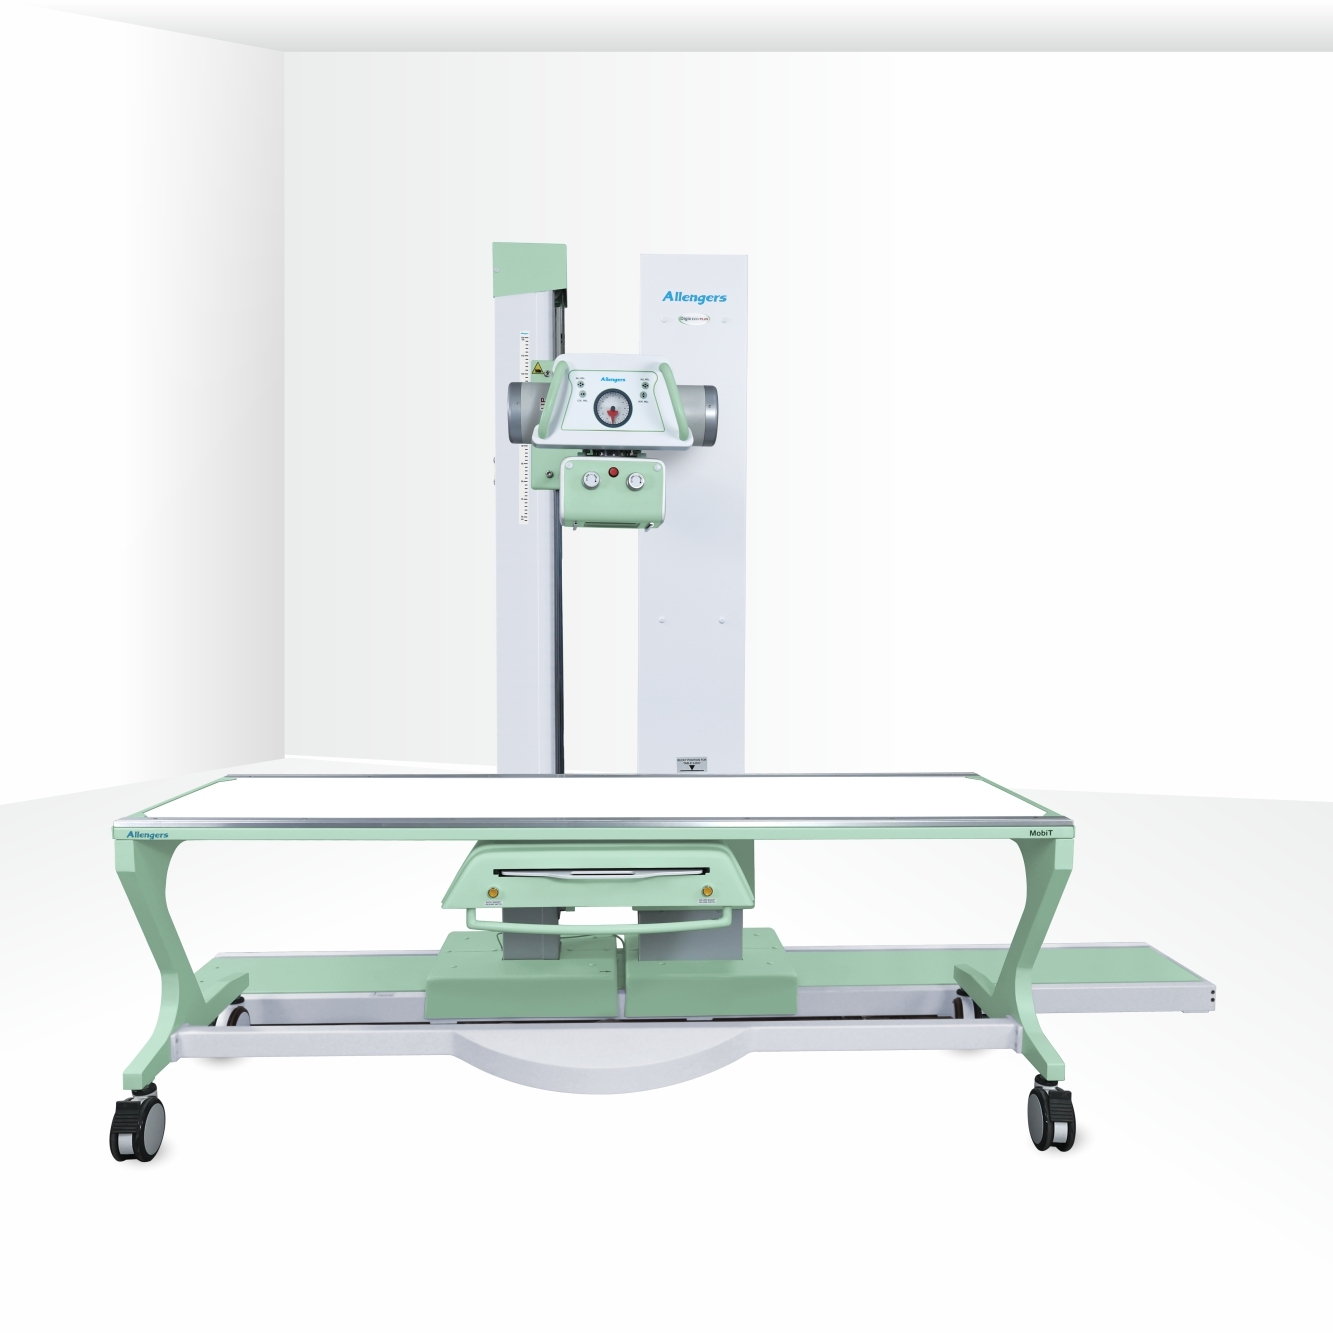 Ceiling Free Digital Radiography System